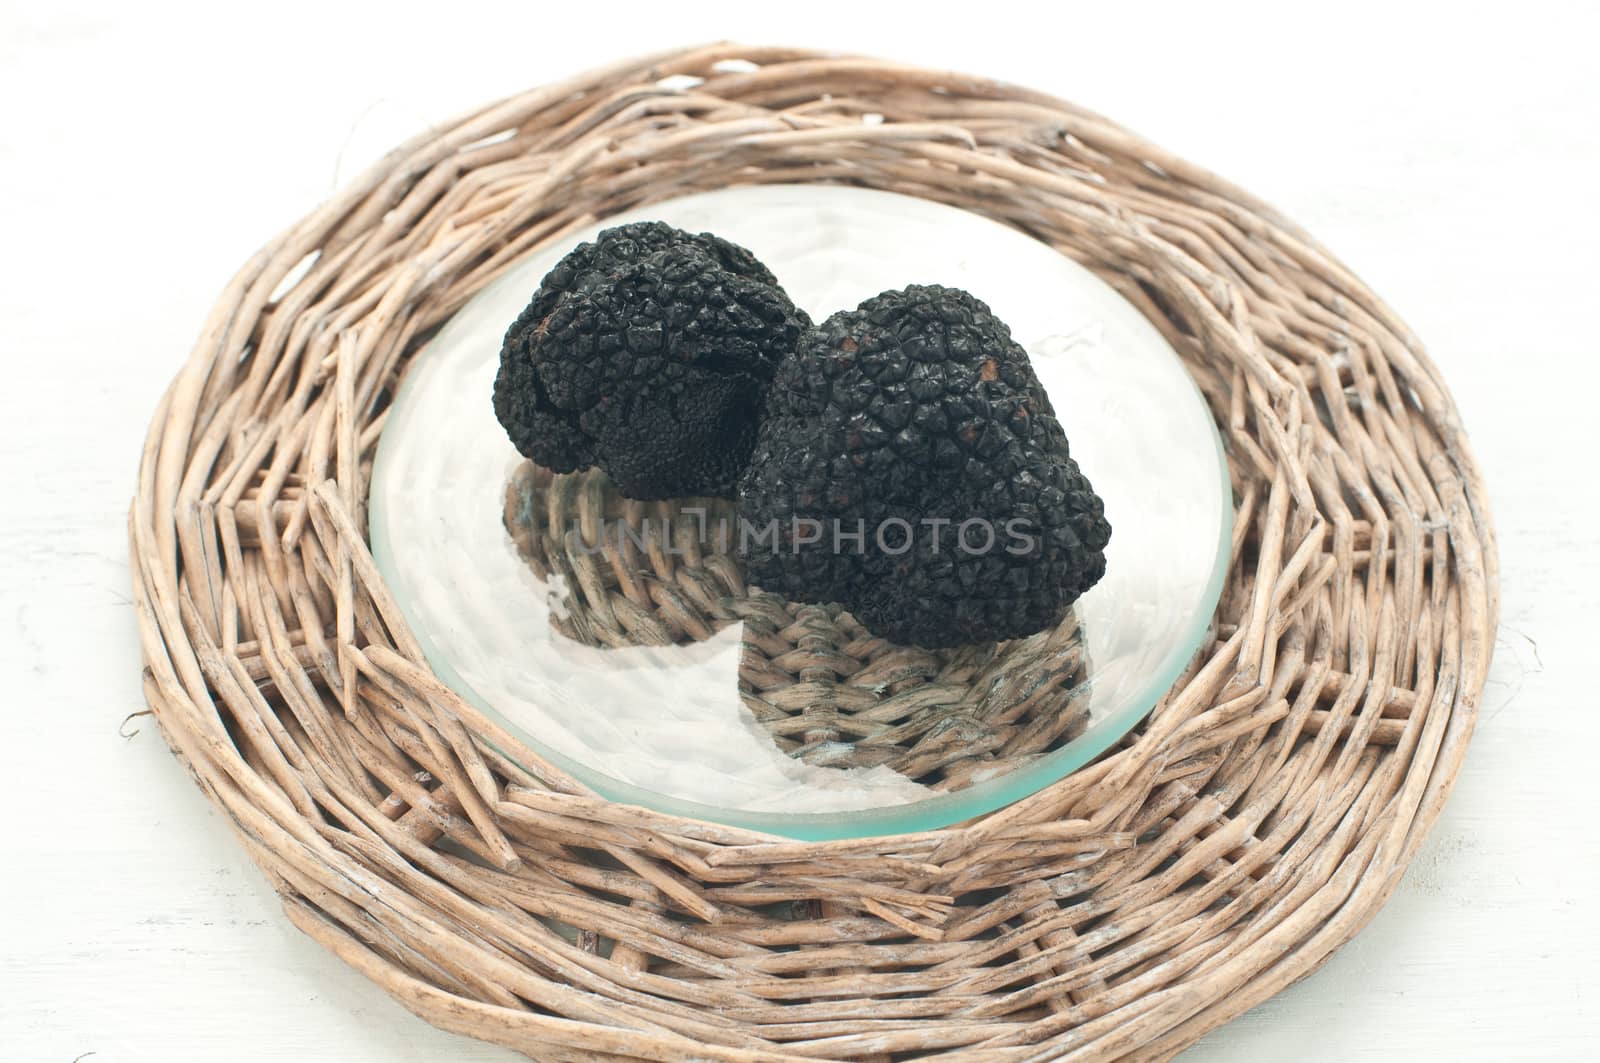 Blacks winter truffles from Umbria called scorzoni by gringox